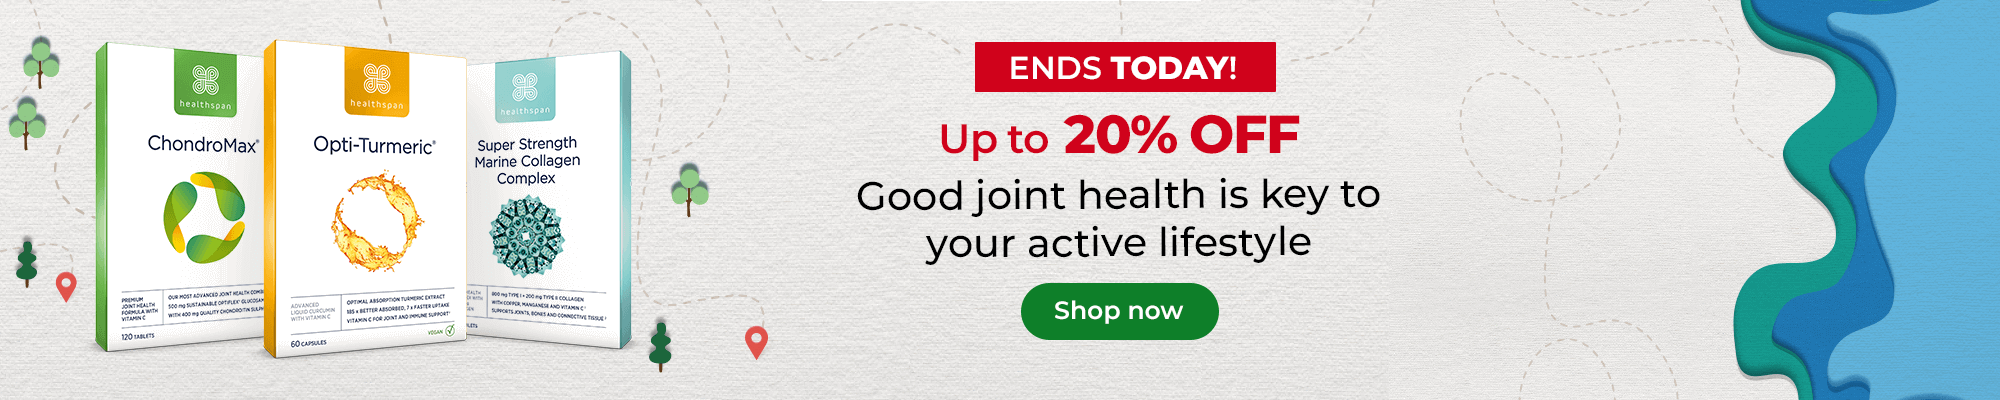 Up to 20% off. Good joint health is key to your active lifestyle. Ends Today! Shop now